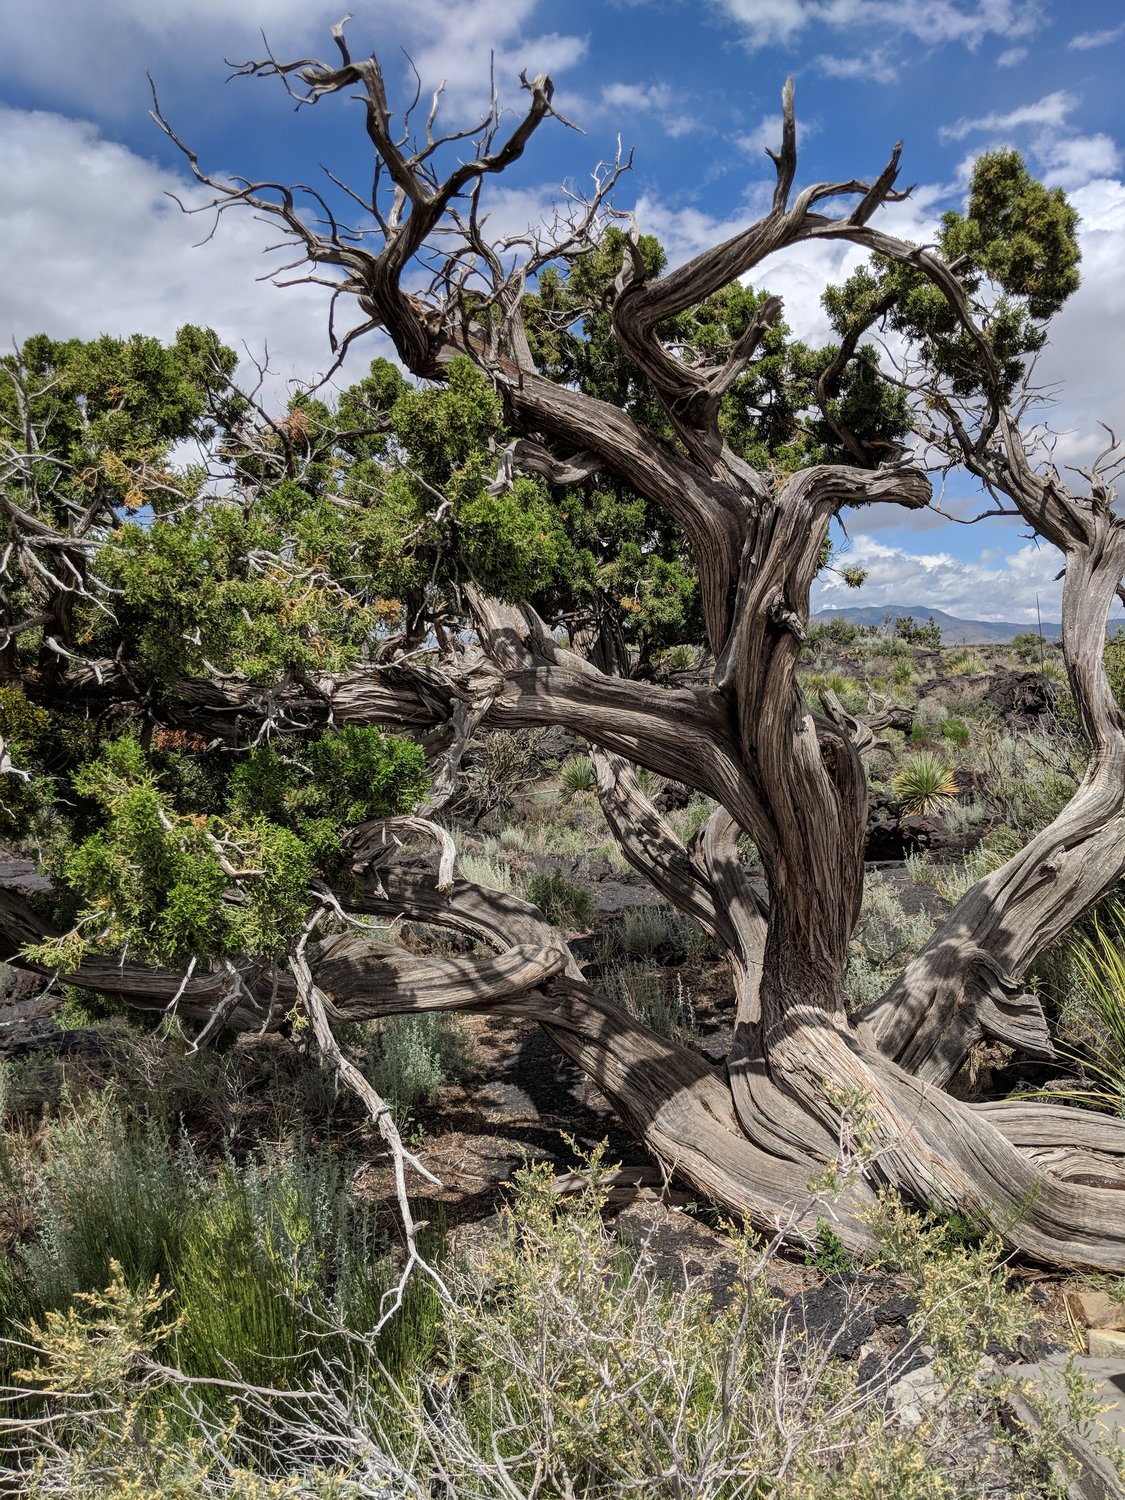 A juniper tree that is estimated to be 400 years old is one of the highlights you can see along the nature trail at Valley of the Fires.